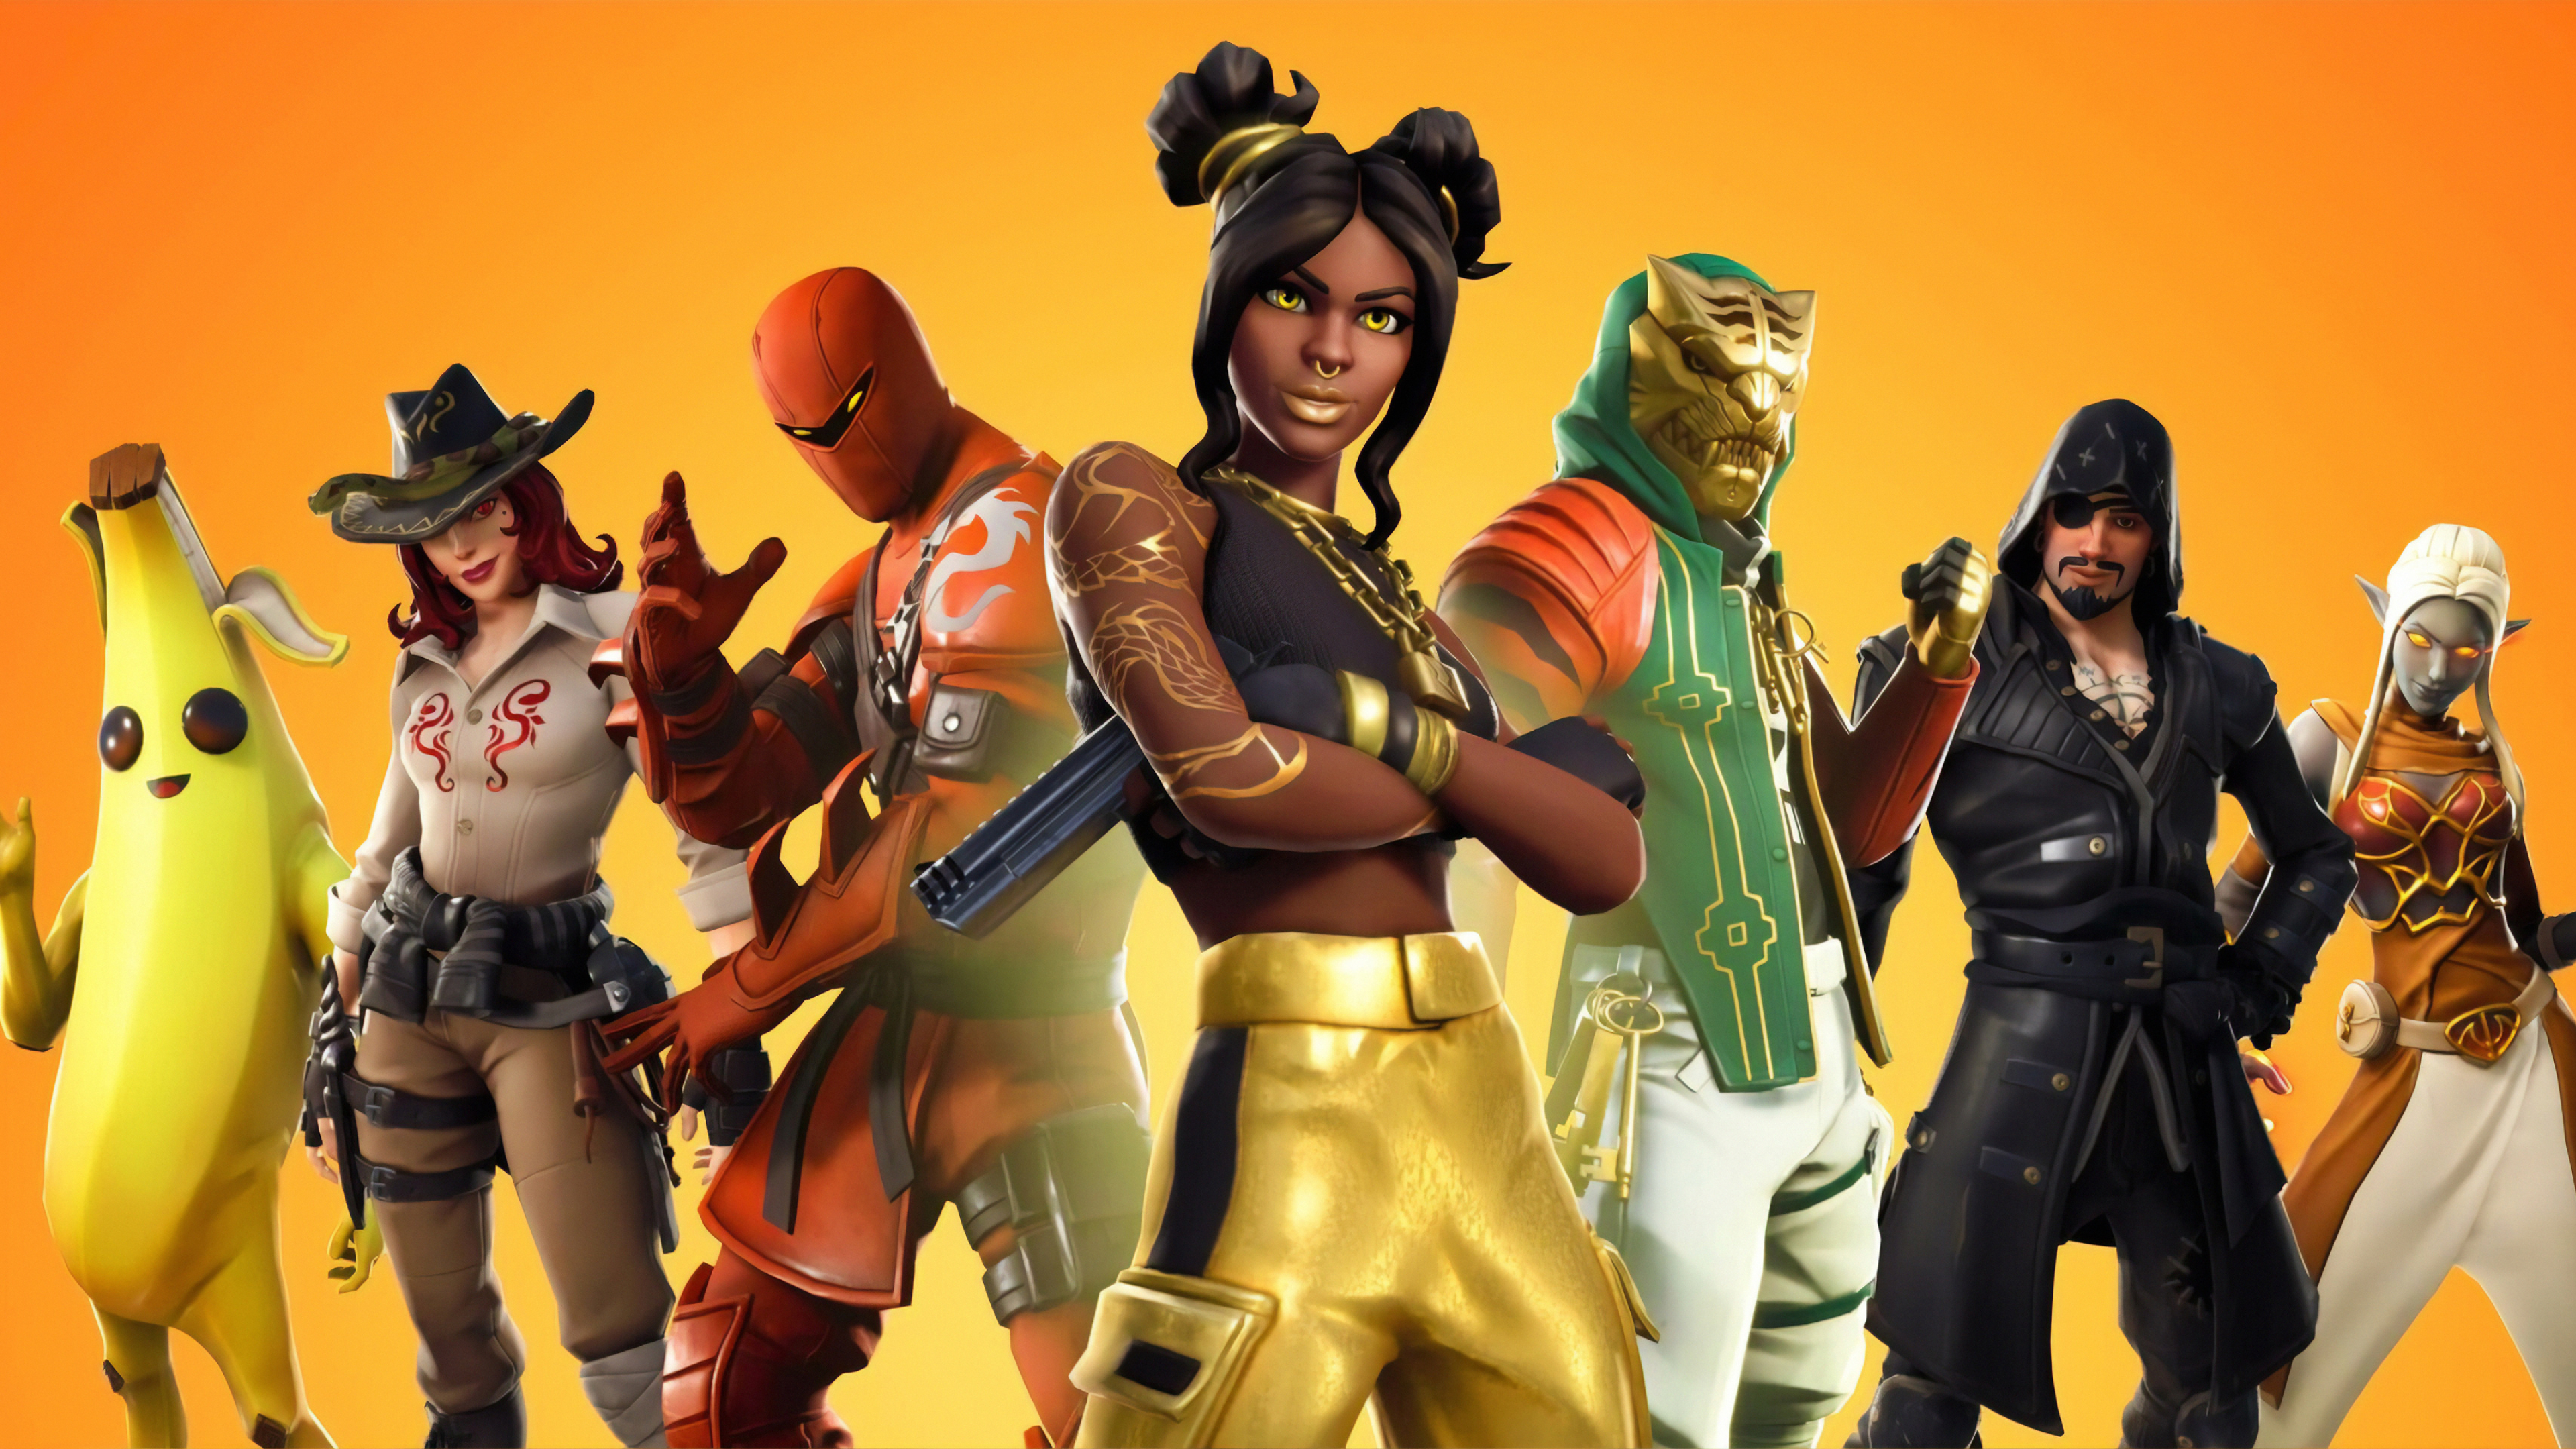 fortnite download for pc